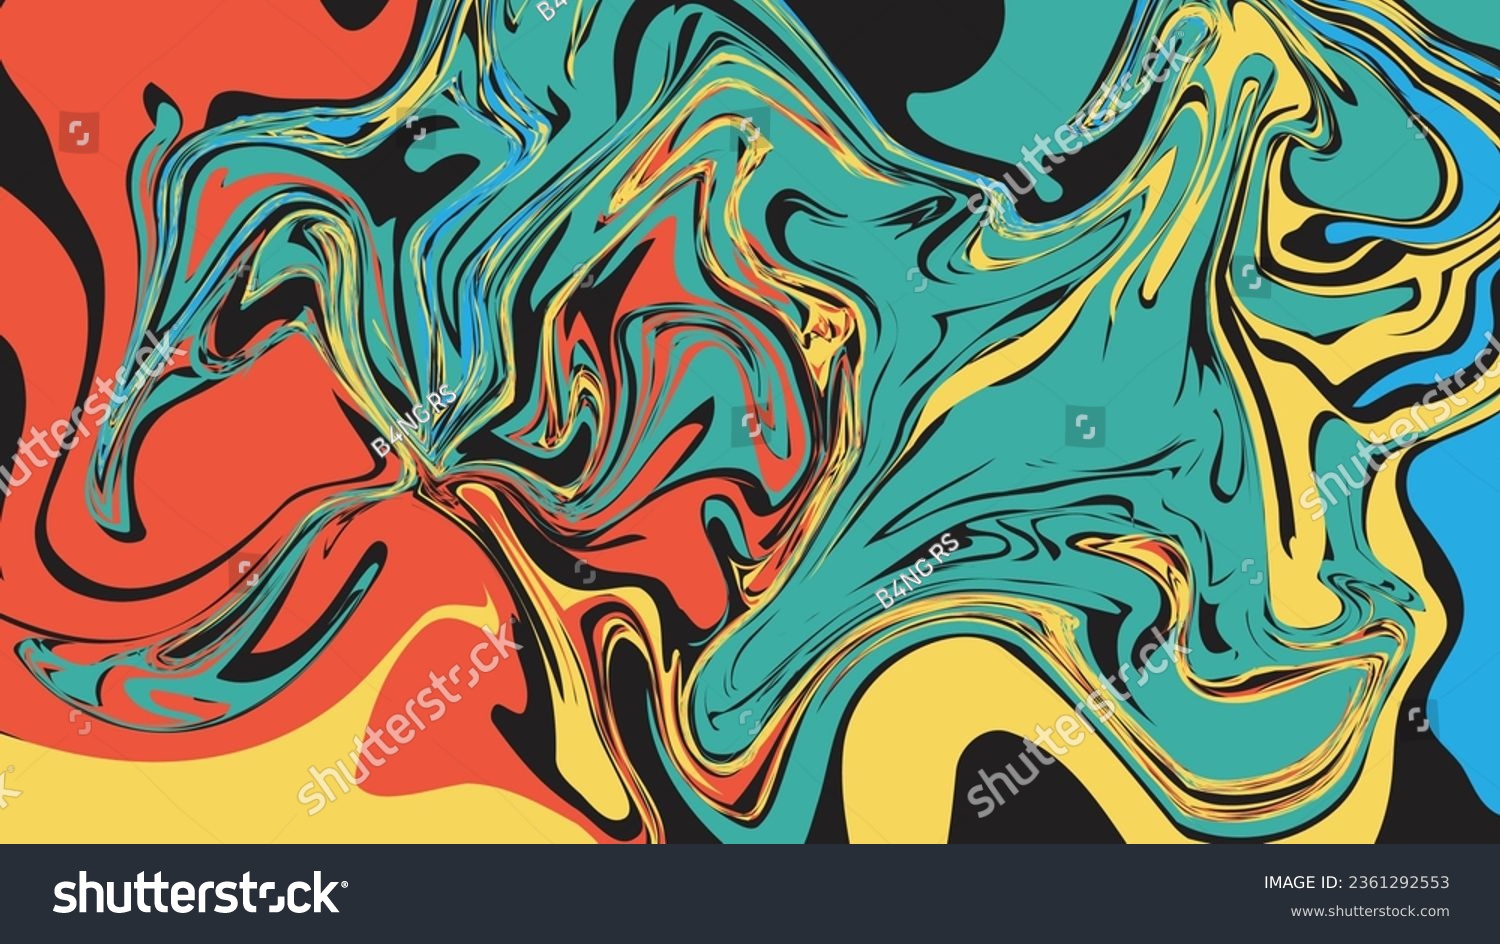 SVG of Abstract background design with various cool and realistic colors svg